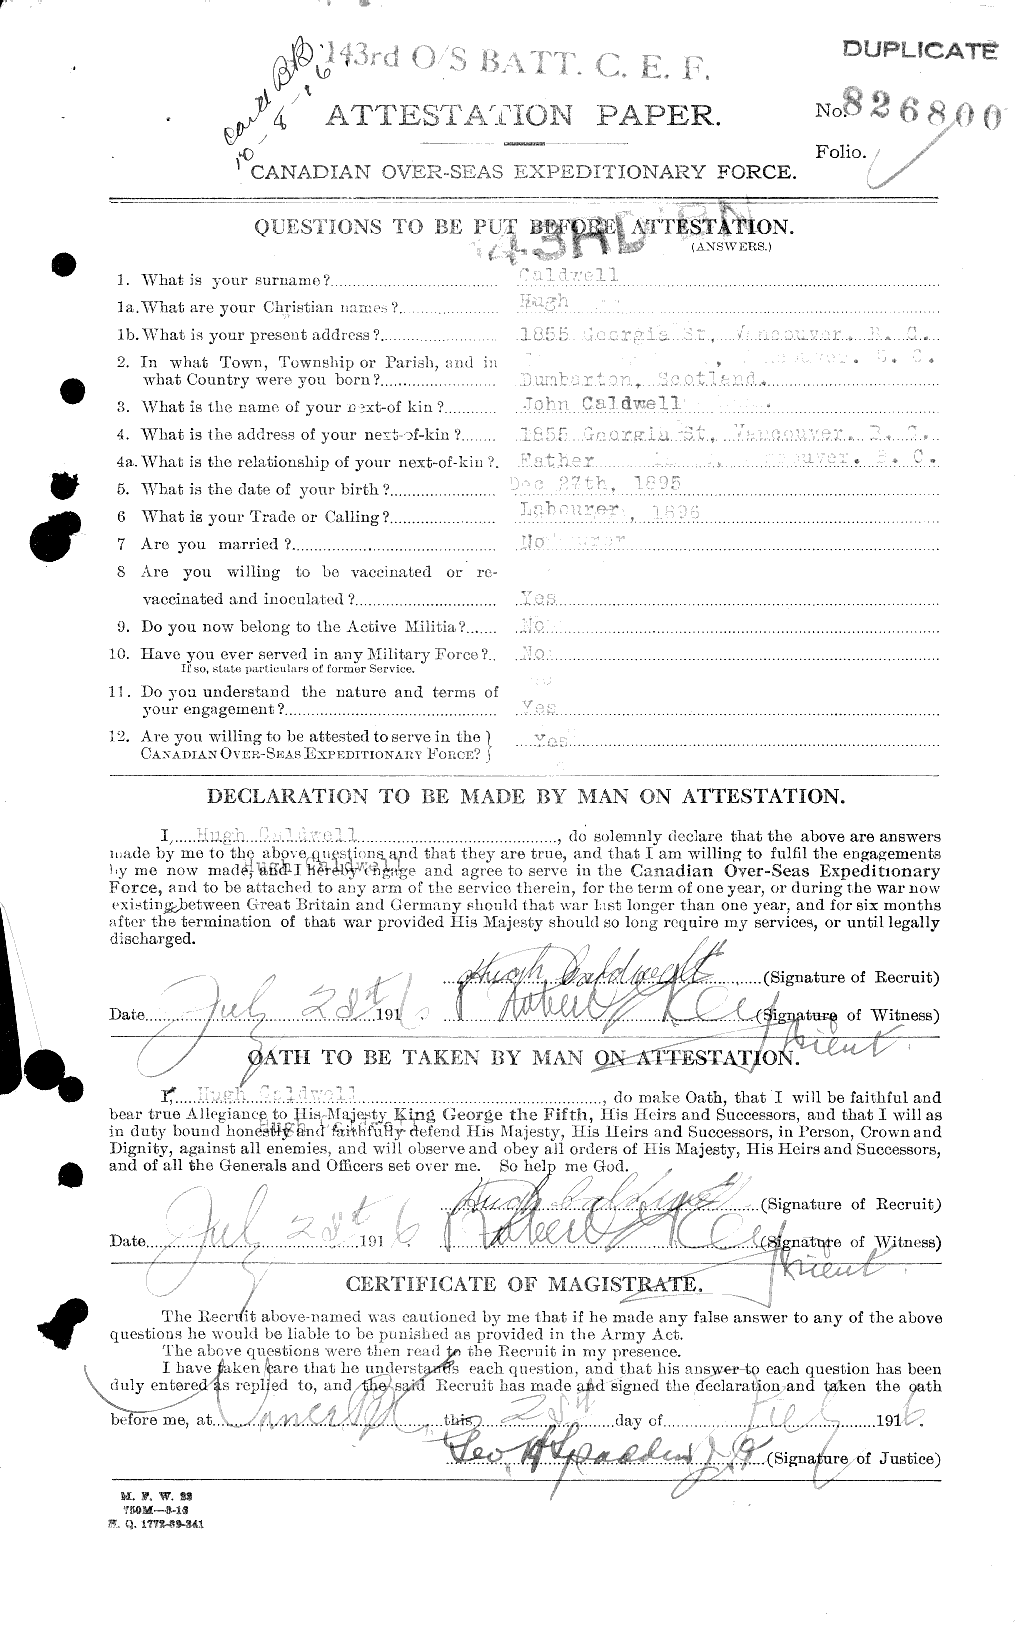 Personnel Records of the First World War - CEF 001060a